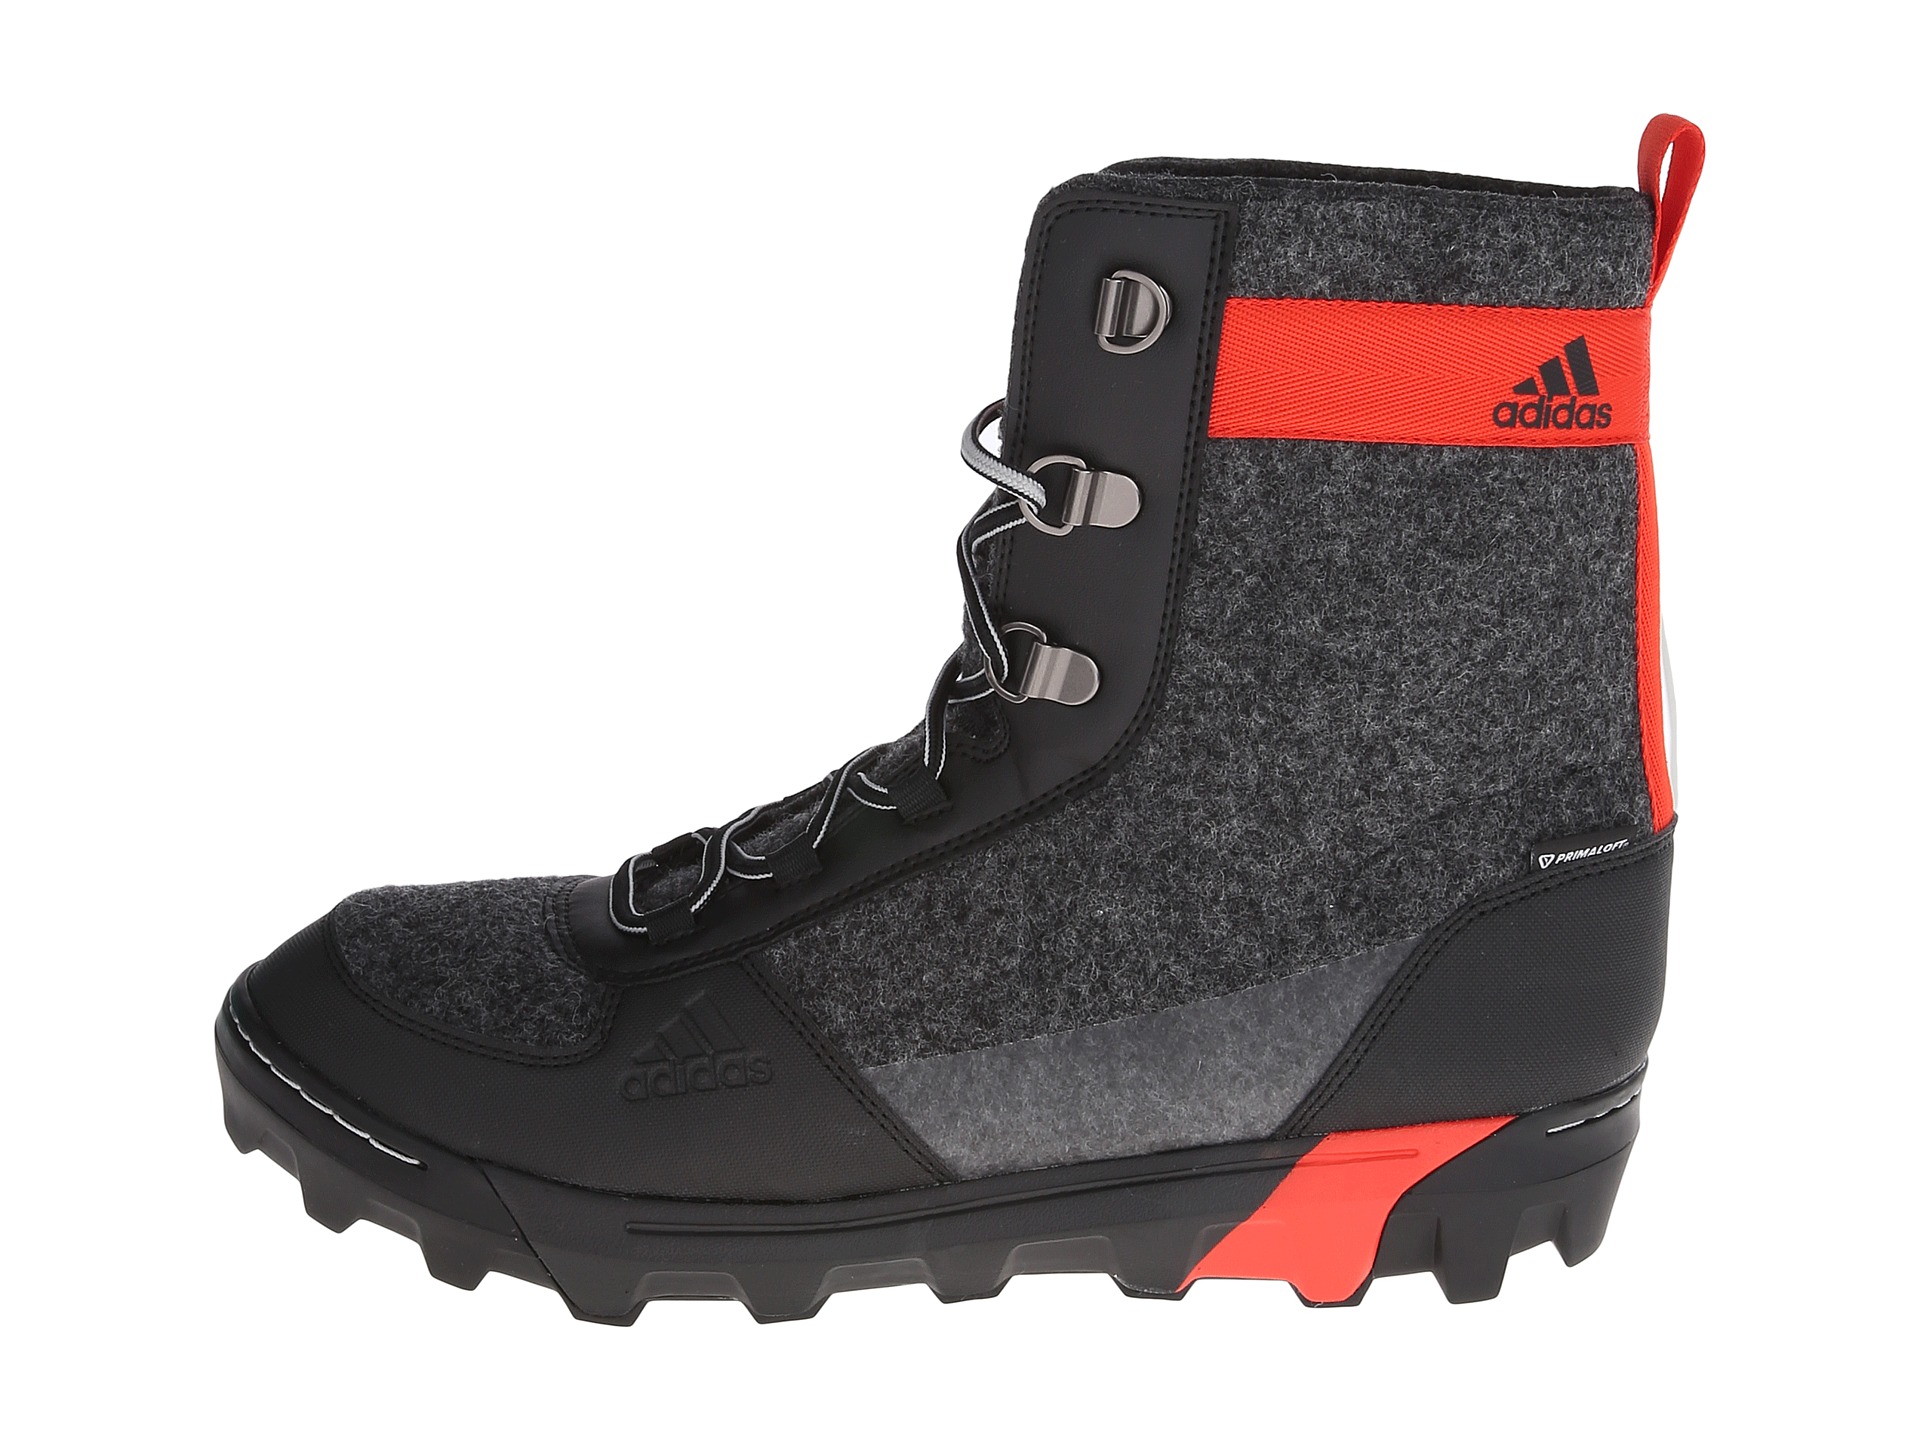 Adidas Outdoor Felt Boot M | Shipped Free at Zappos